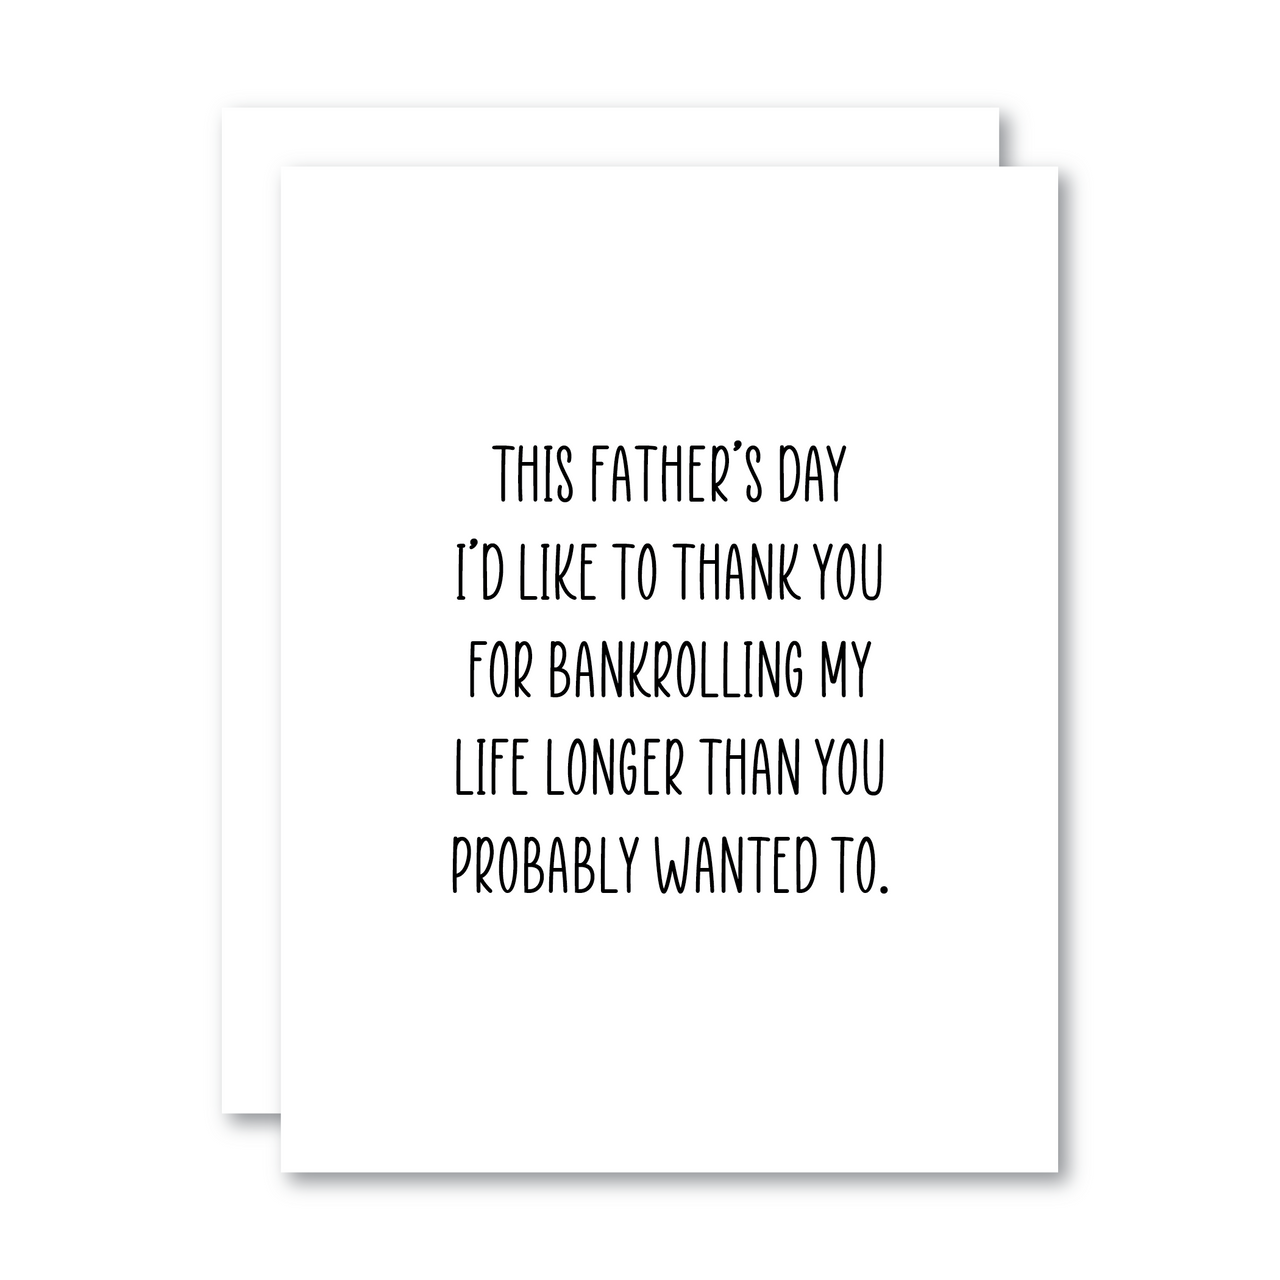 This Father's Day...